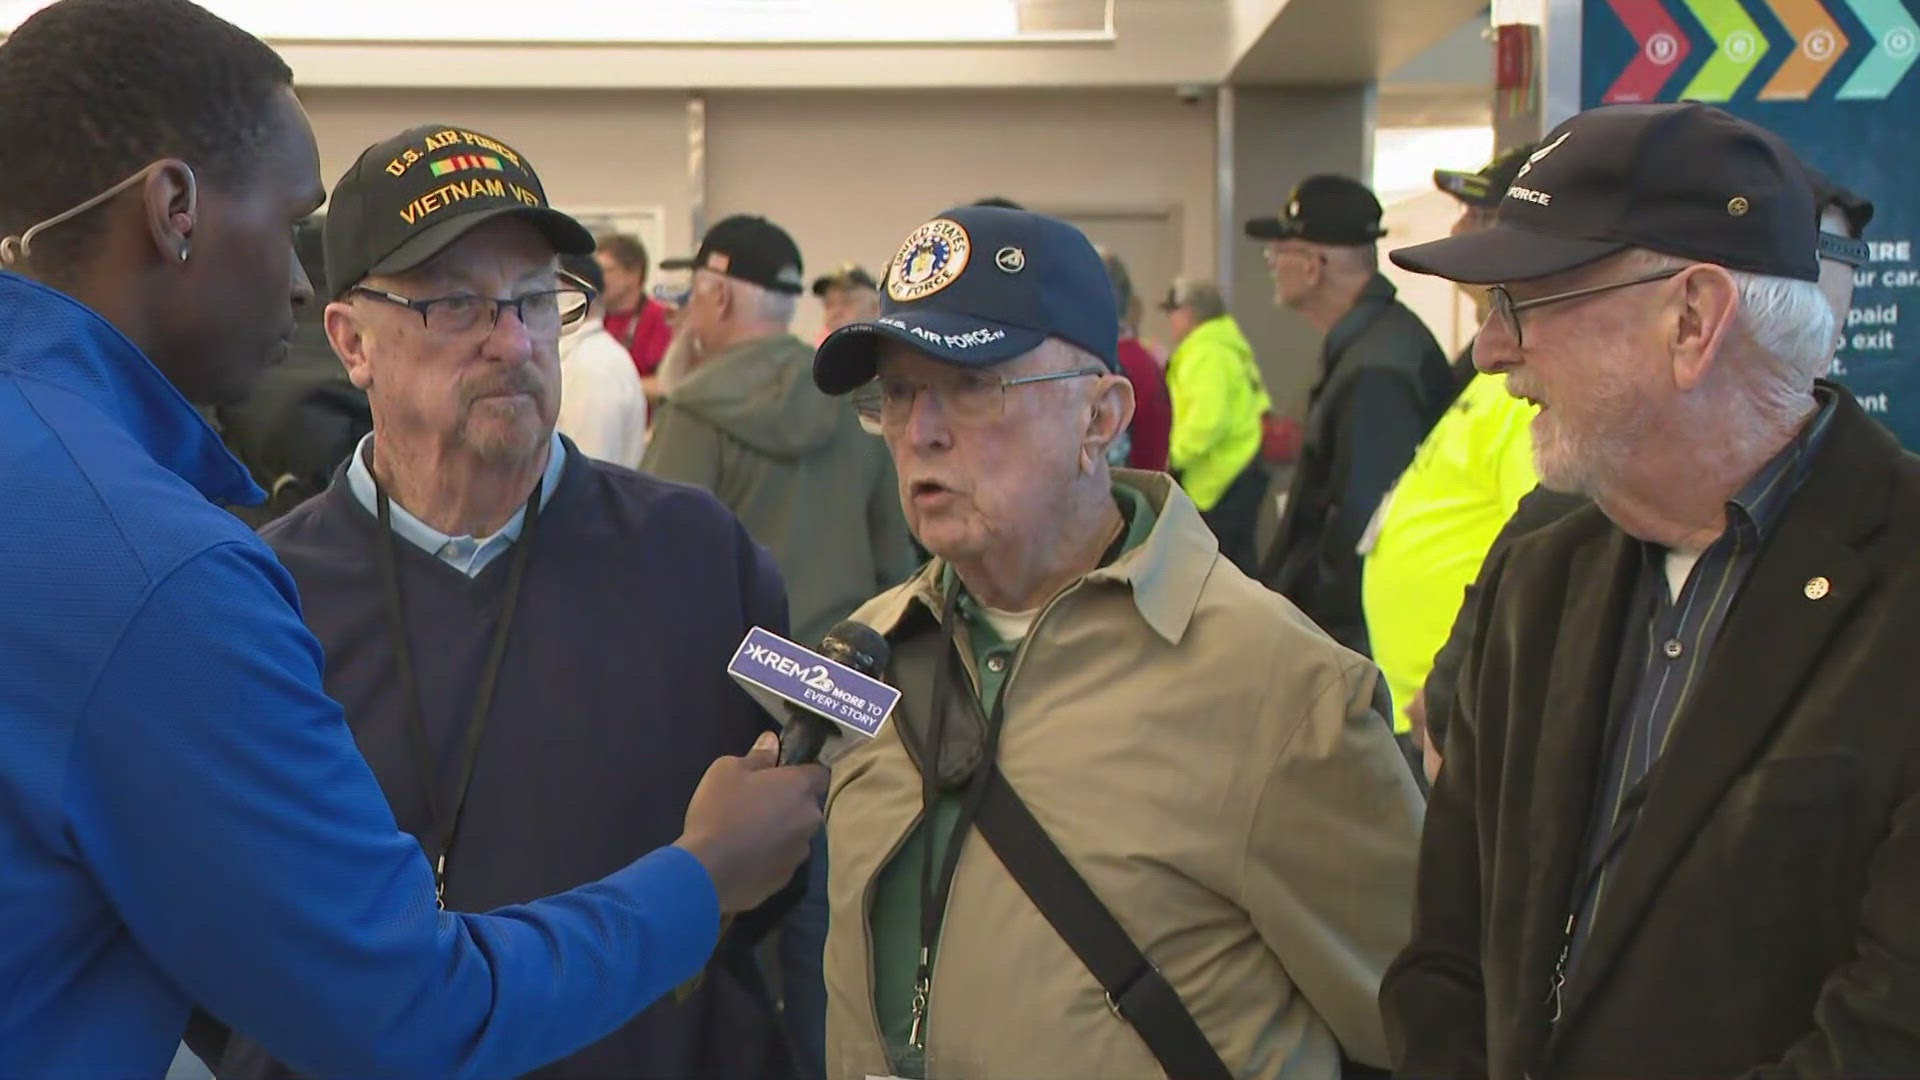 On this trip there will be 89 veterans in total, 85 served in the Vietnam War and four served in the Korean War.